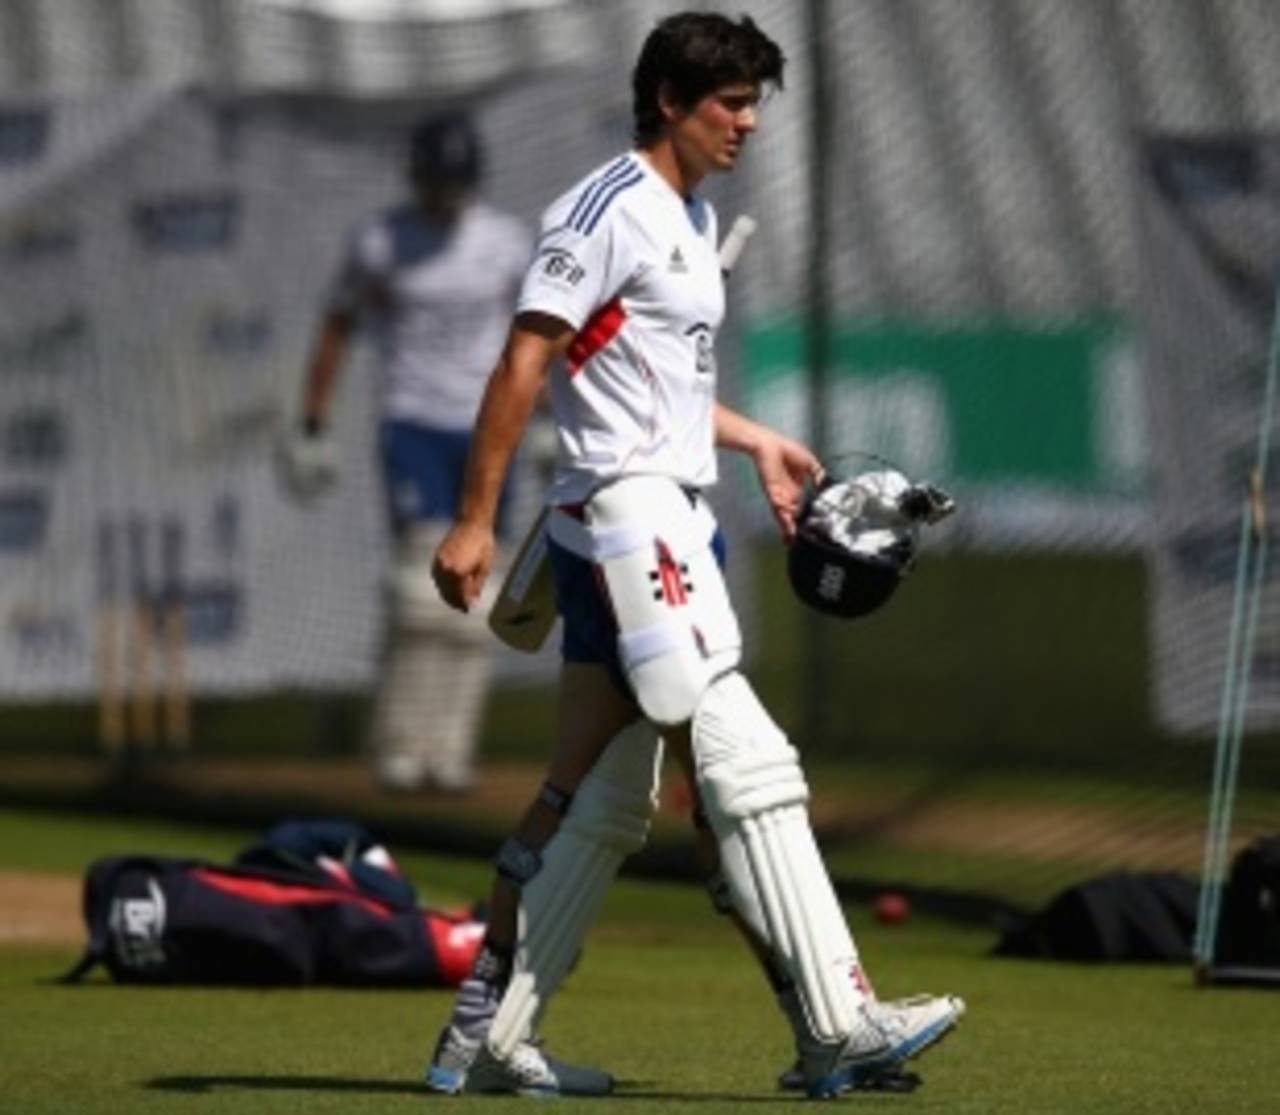 Alastair Cook at a net session at Trent Bridge, Nottingham, July 9, 2013